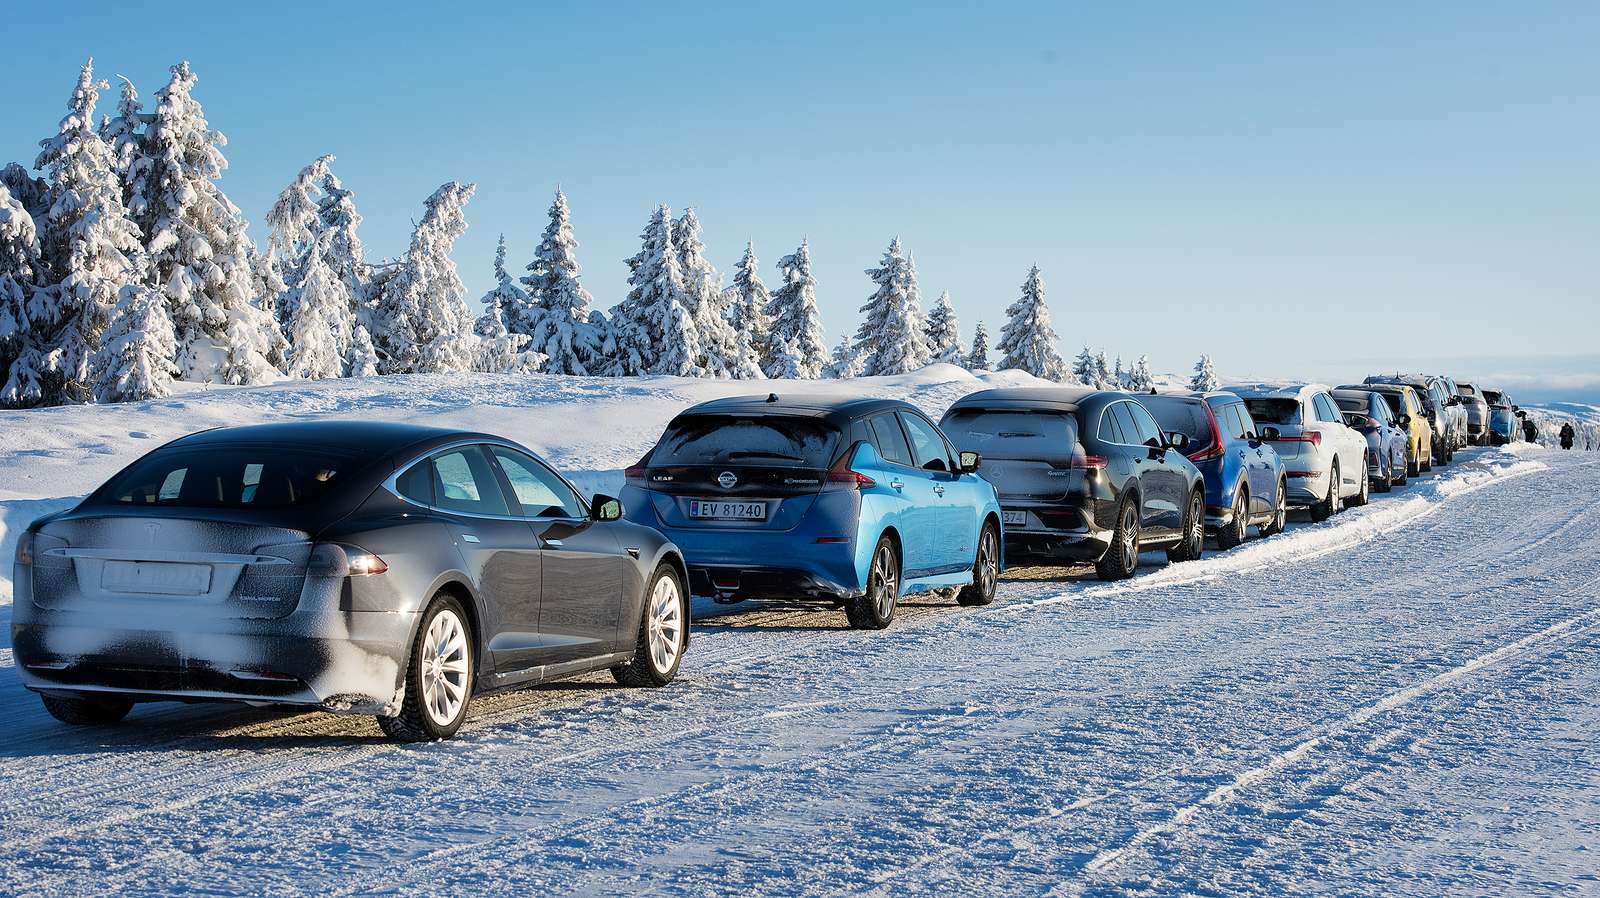 Winter lanscape and car lineup